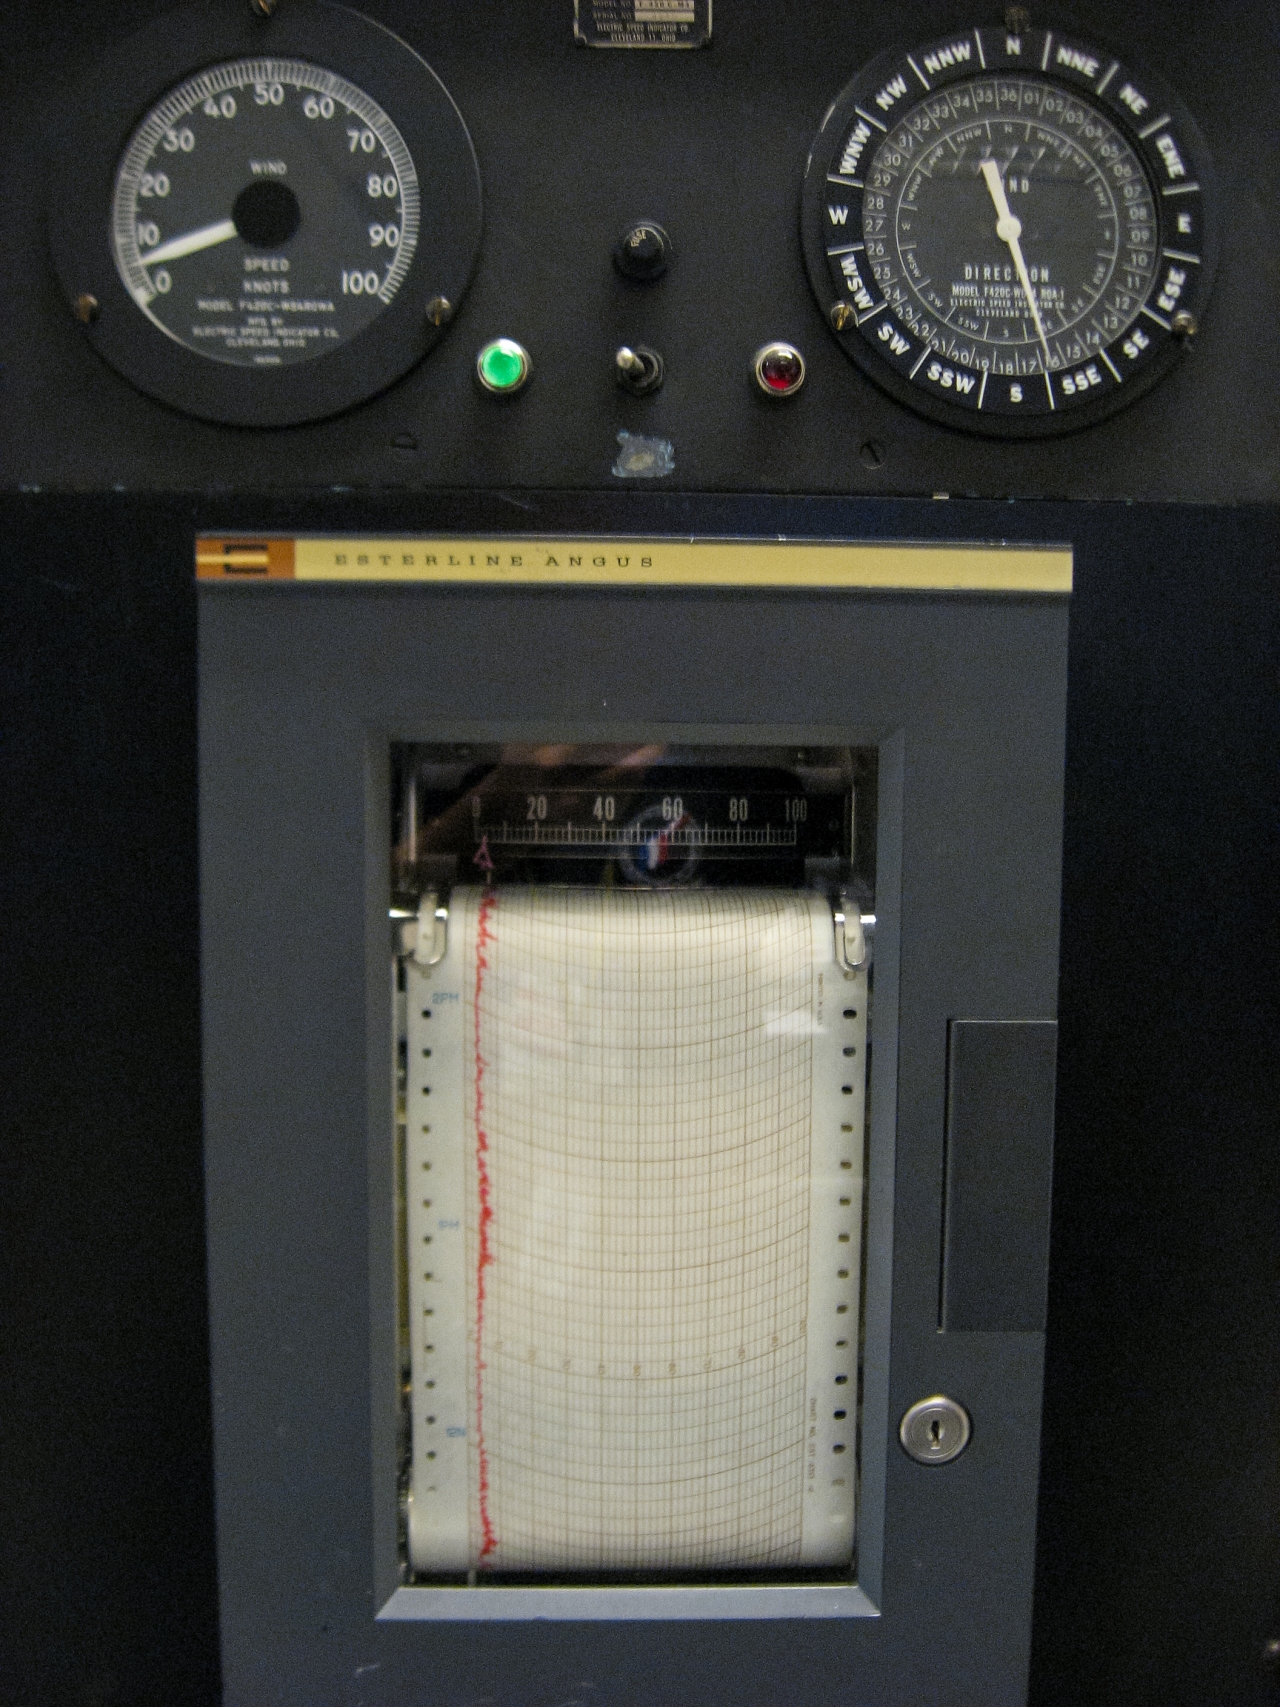 Weather station hardware by Electric Speed Indicator Company of Cleveland, Ohio and Esterline Angus of Bellevue, Washington in the Miami-South Florida Weather Forecast Office at the National Hurricane Center.